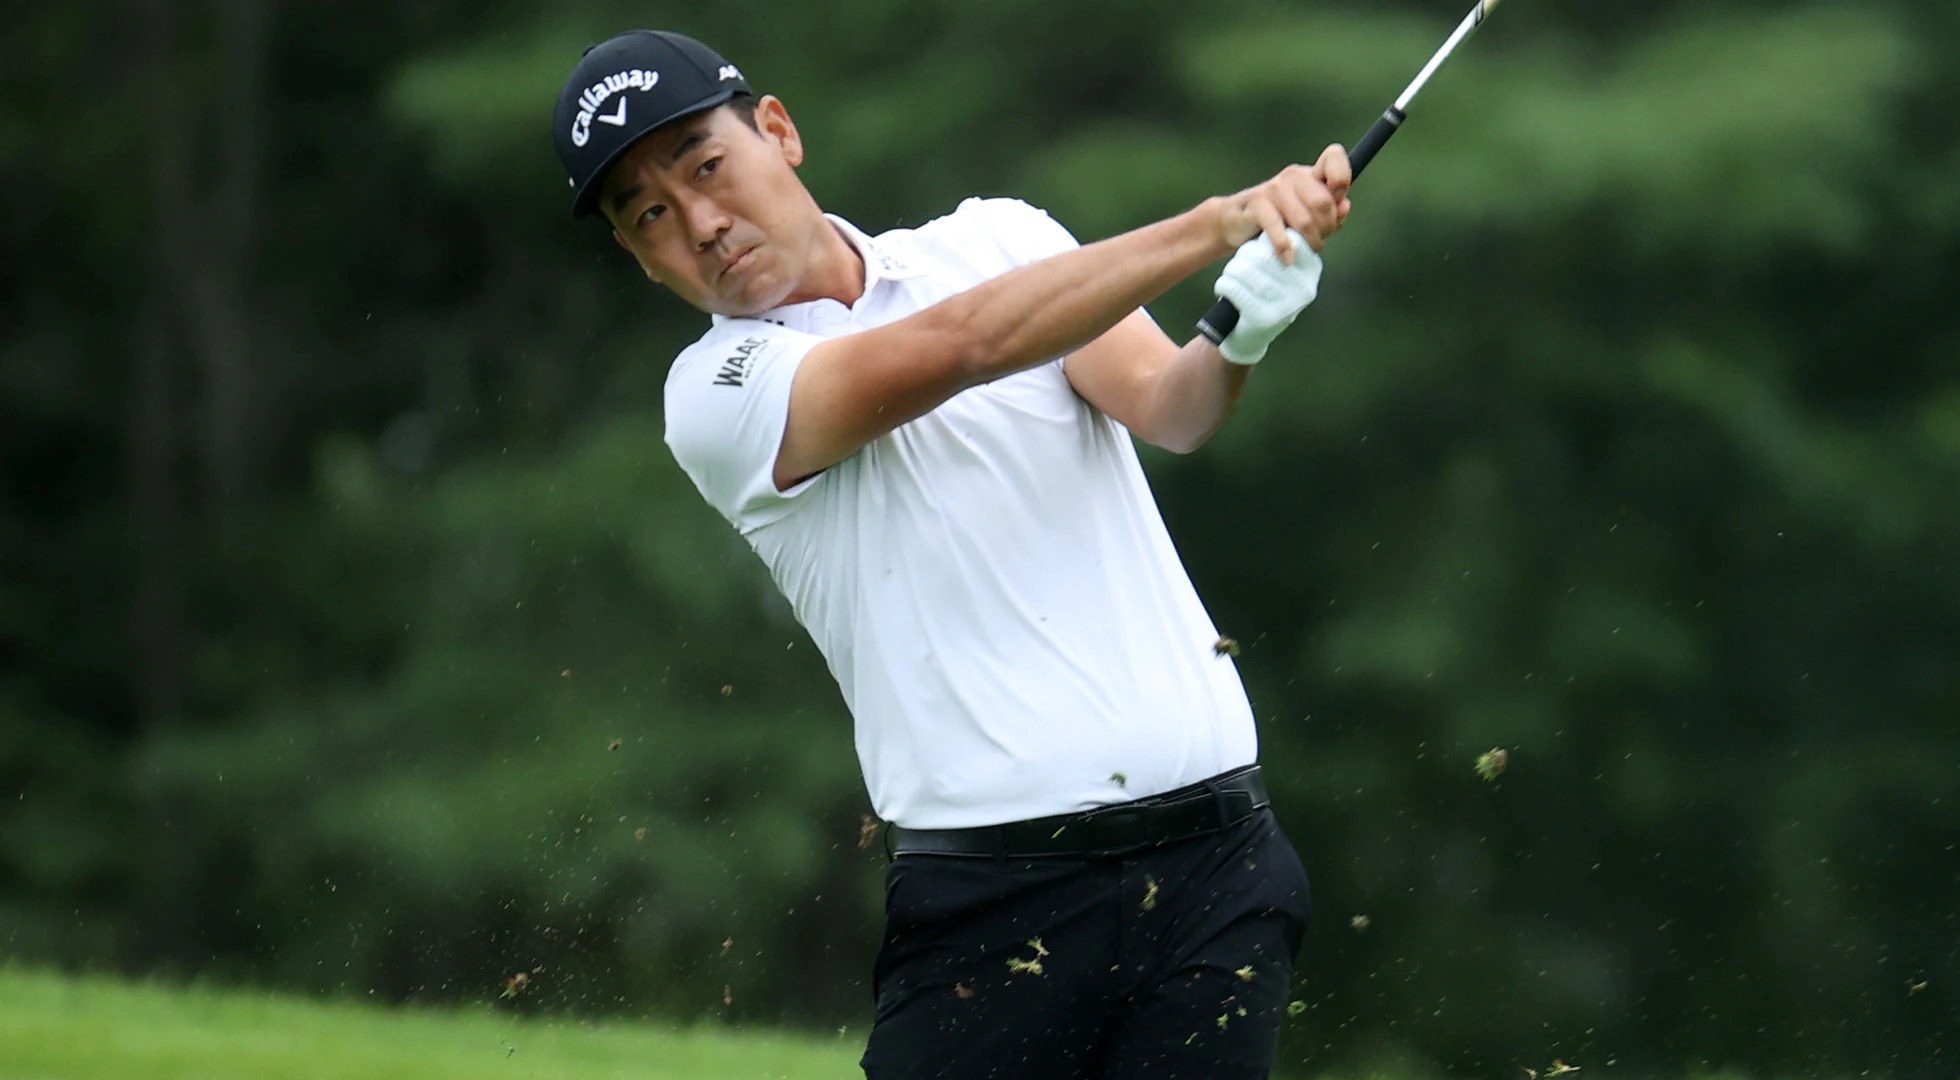 Kevin Na holes birdie chip at John Deere Classic … with his putter